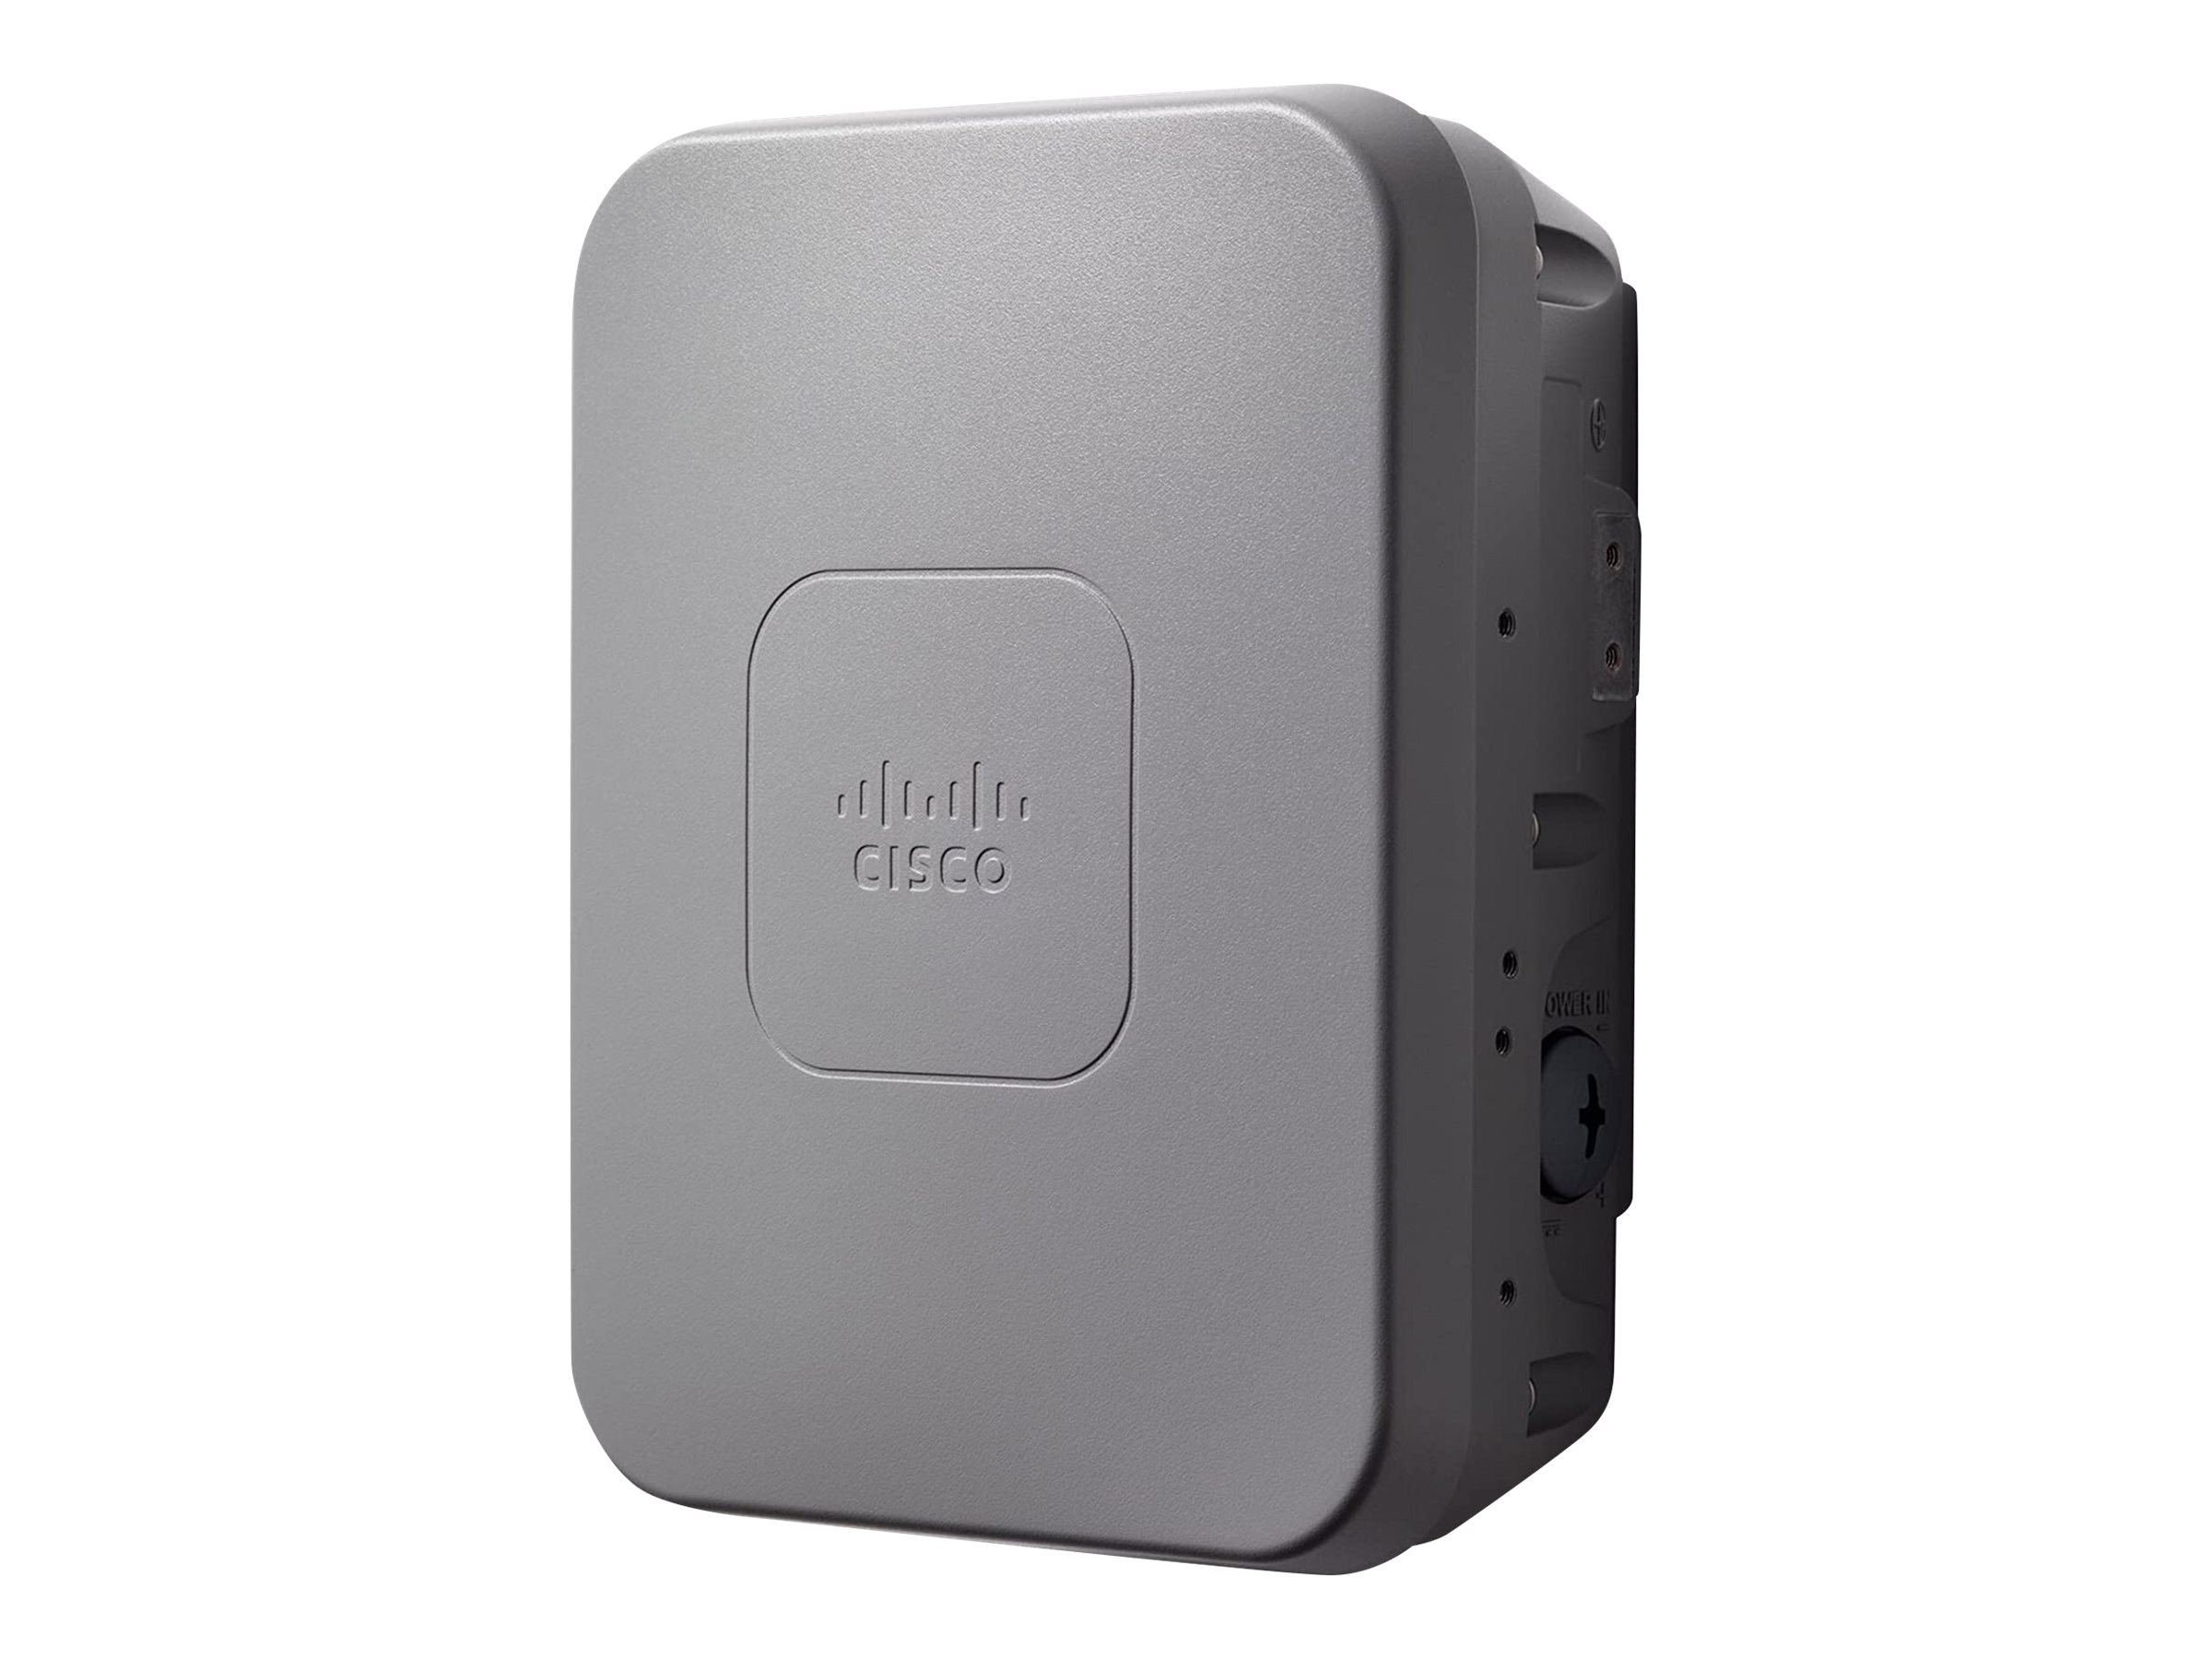 Cisco Aironet 1562I - Wireless access point - Wi-Fi 5 - 2.4 GHz, 5 GHz - image 1 of 2